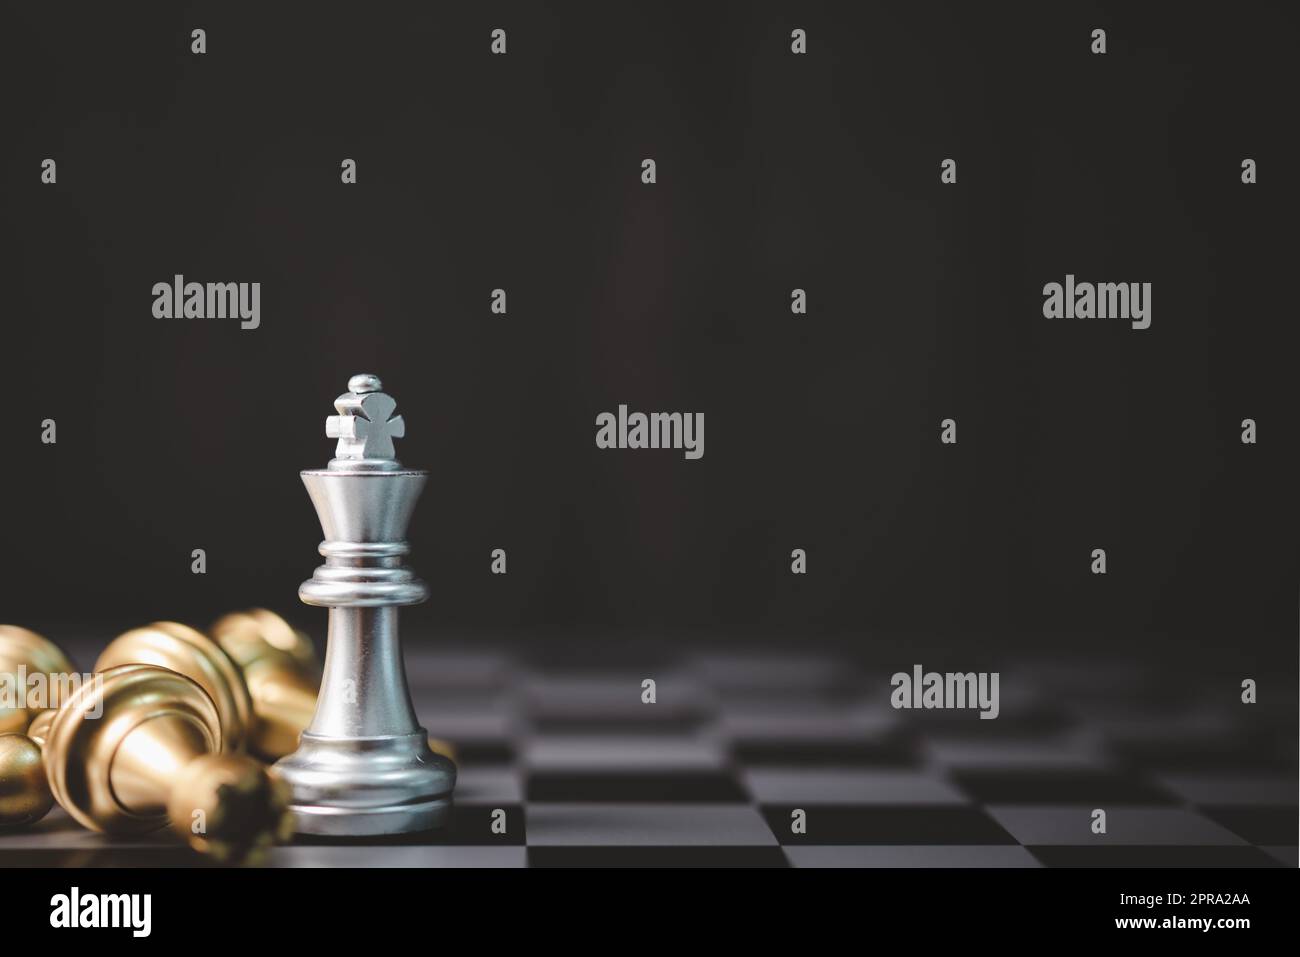 chess game stand on chessboard.Business strategy teamwork success investment concept. Stock Photo